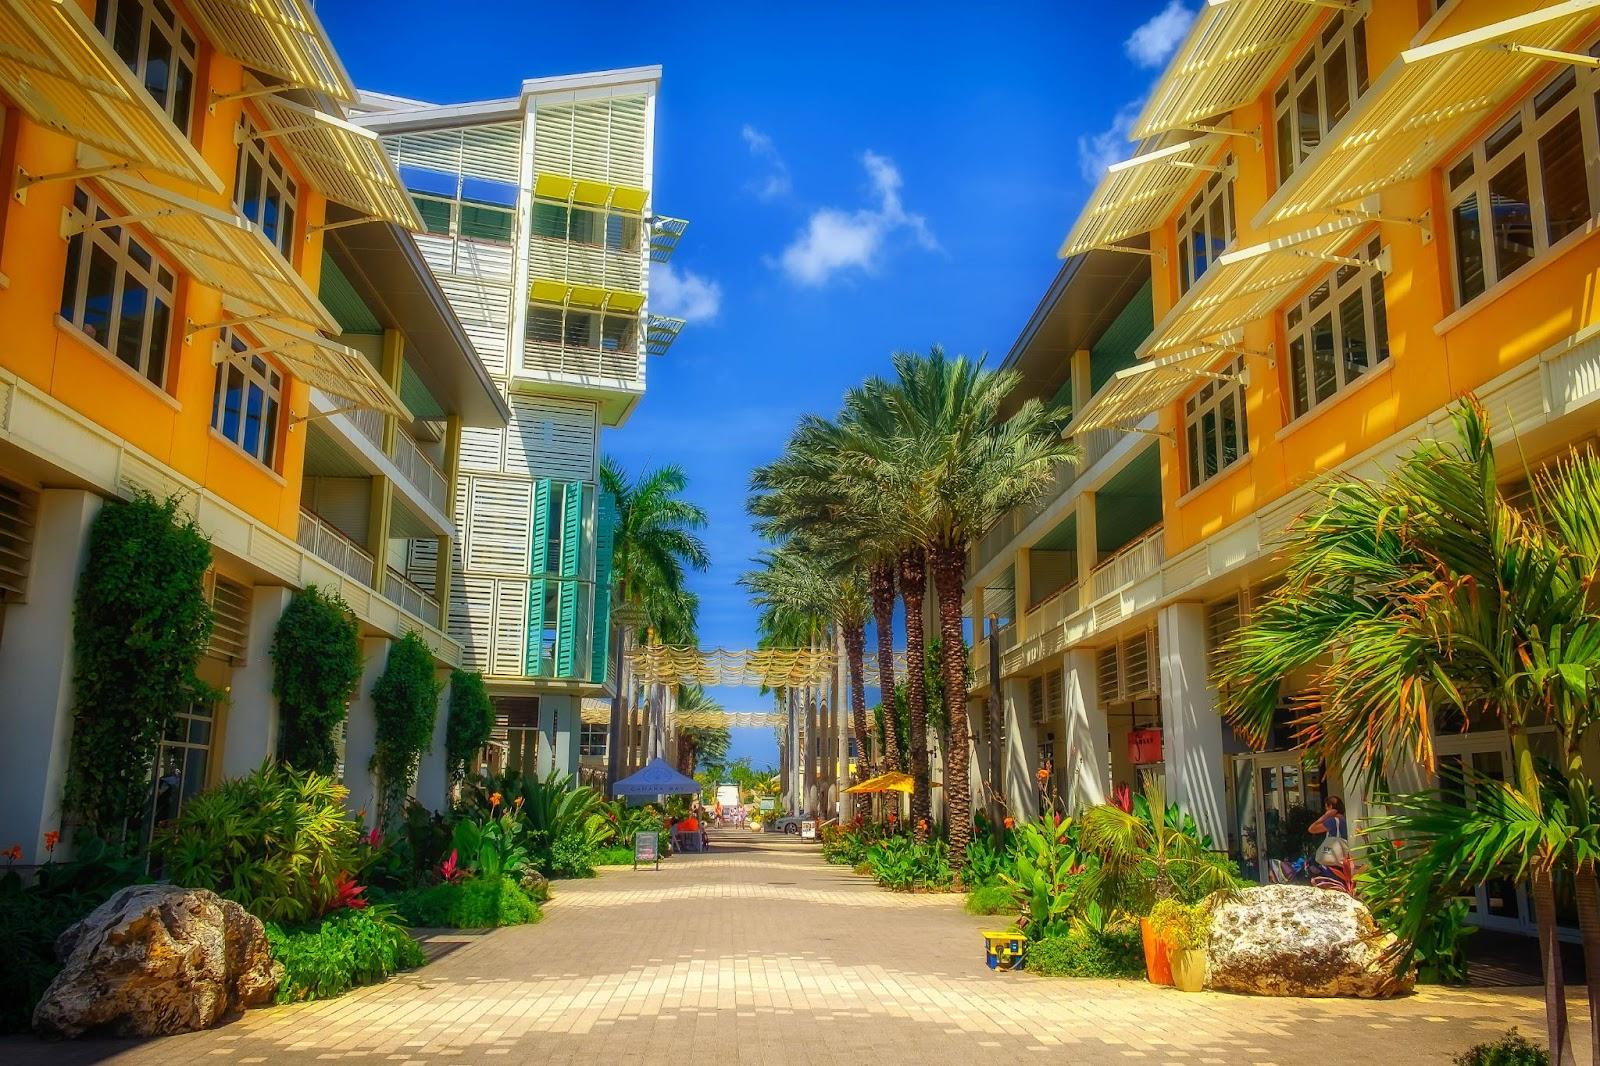 Grand Cayman, Cayman Islands, The Paseo in Camana Bay a modern waterfront town in the Caribbean